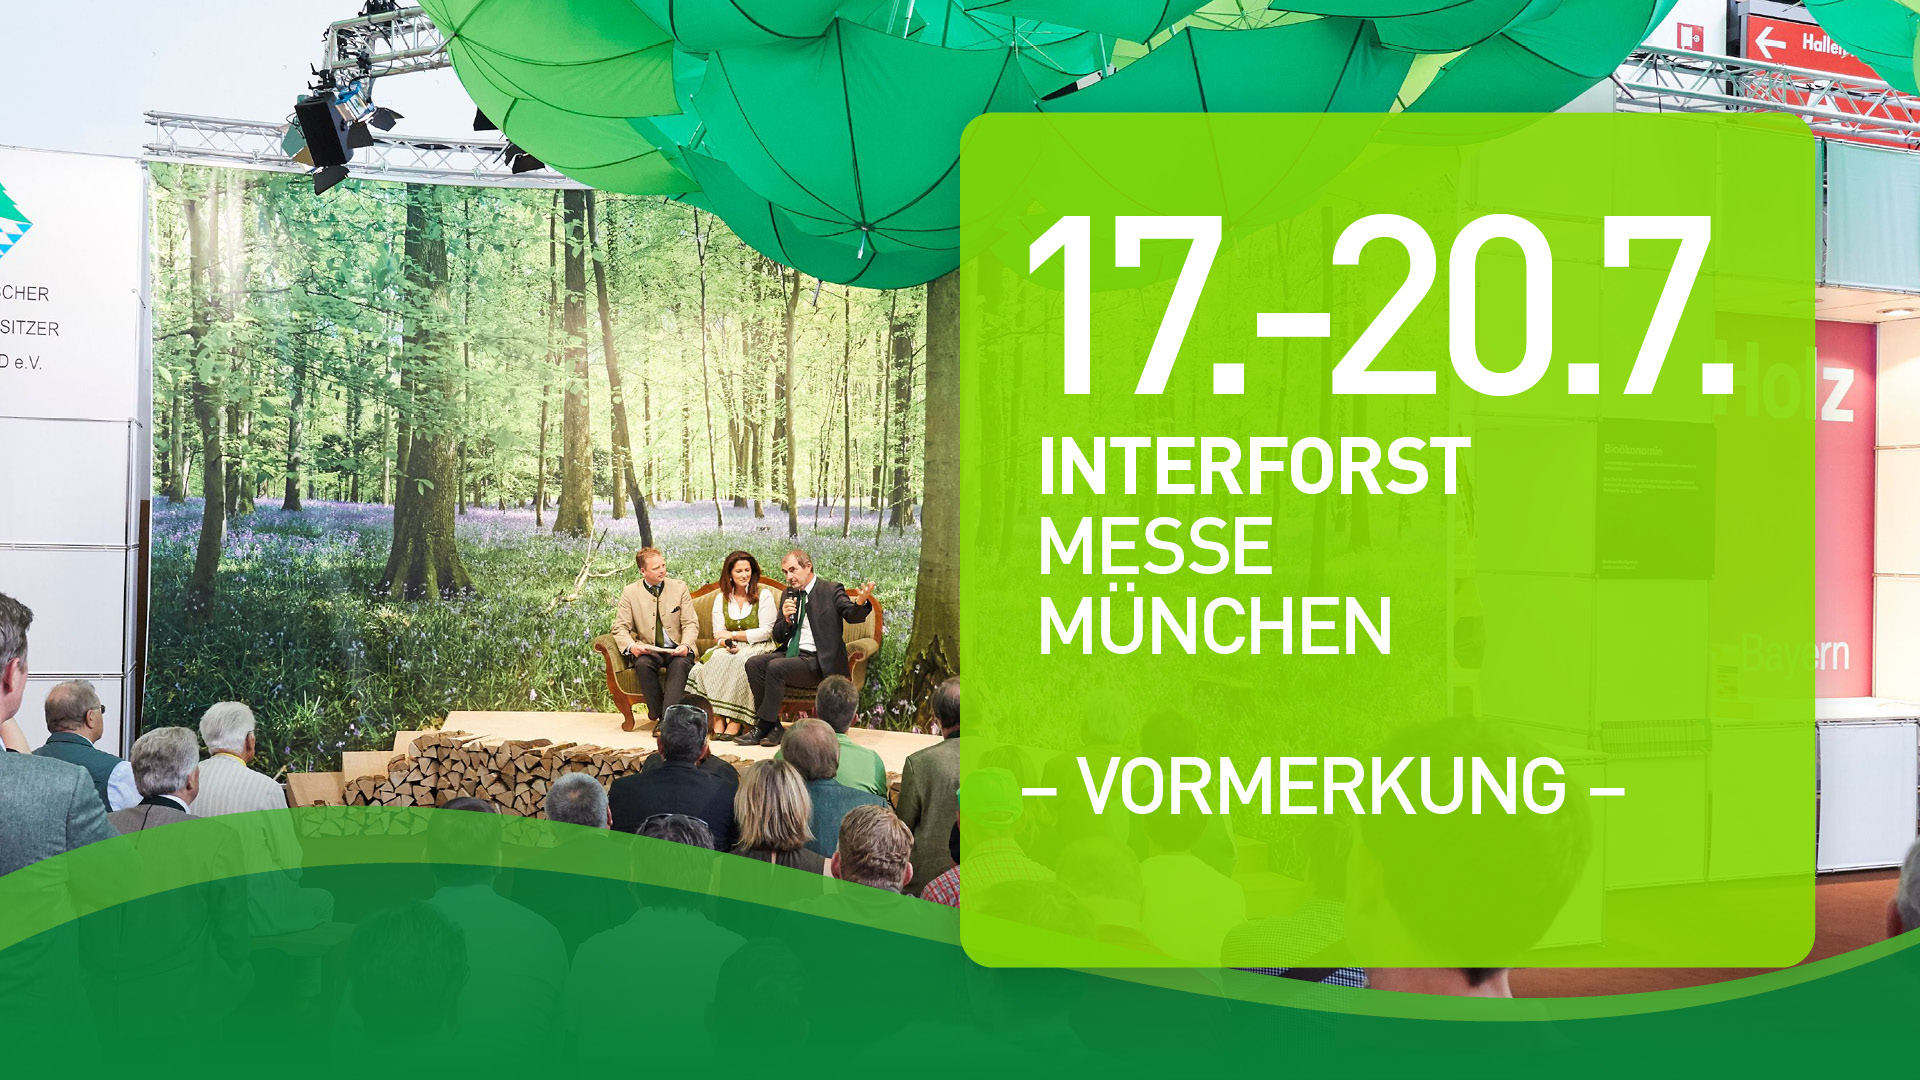 You are currently viewing Messe Interforst 17.-20.07.22